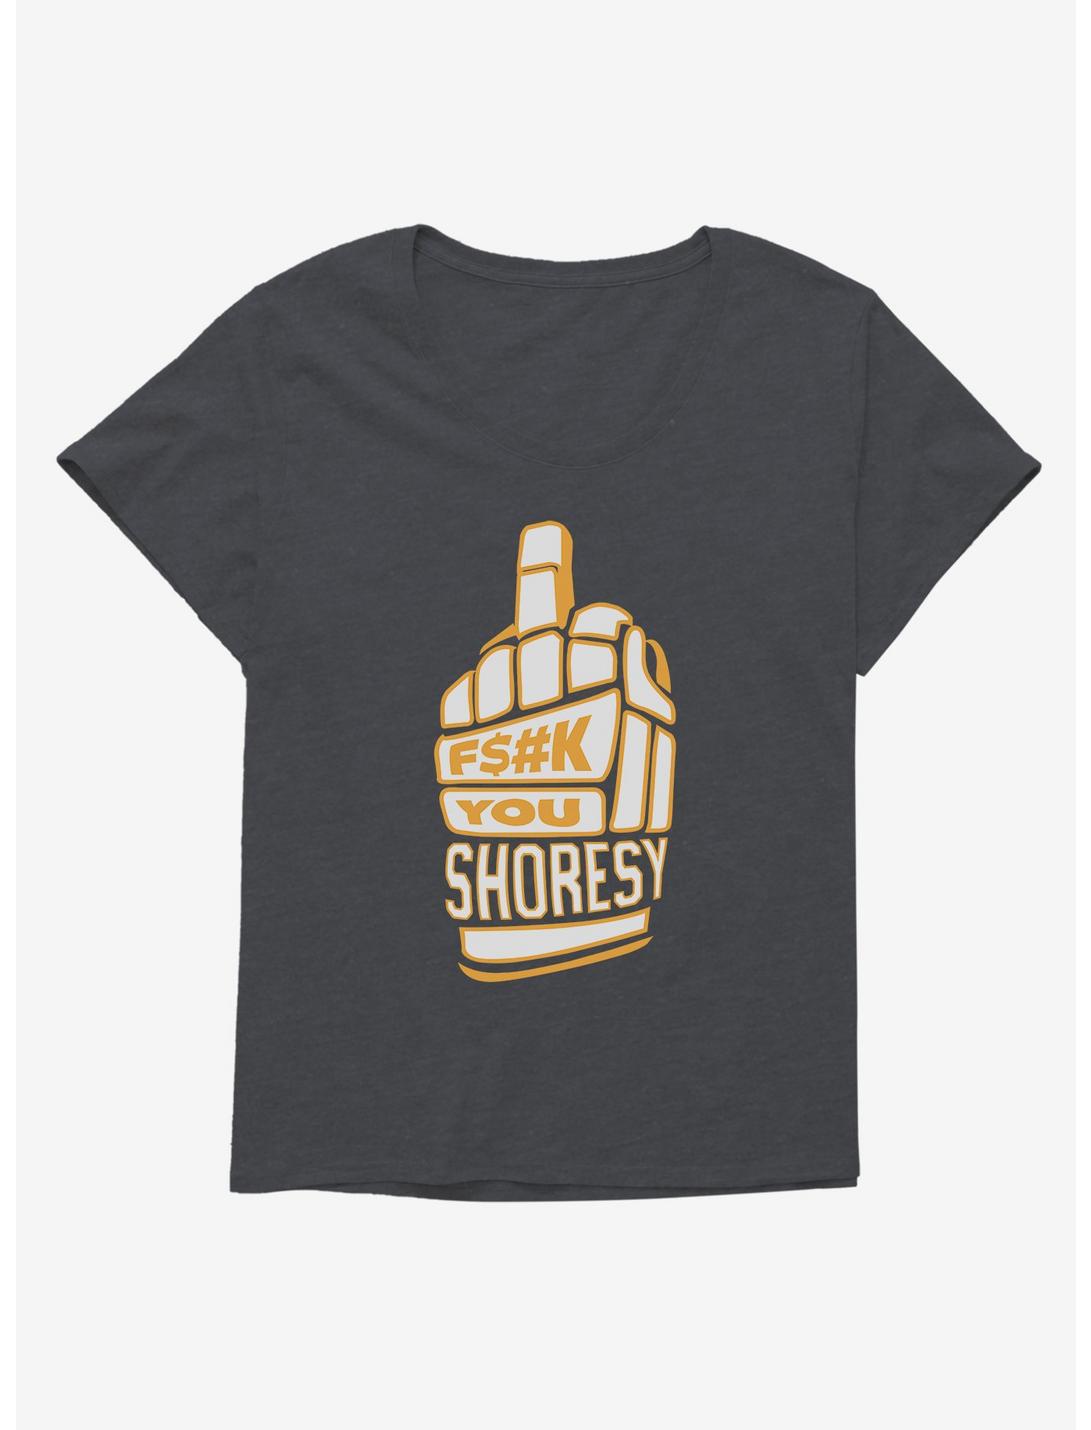 Shoresy F You Finger Girls T-Shirt Plus Size, CHARCOAL HEATHER, hi-res